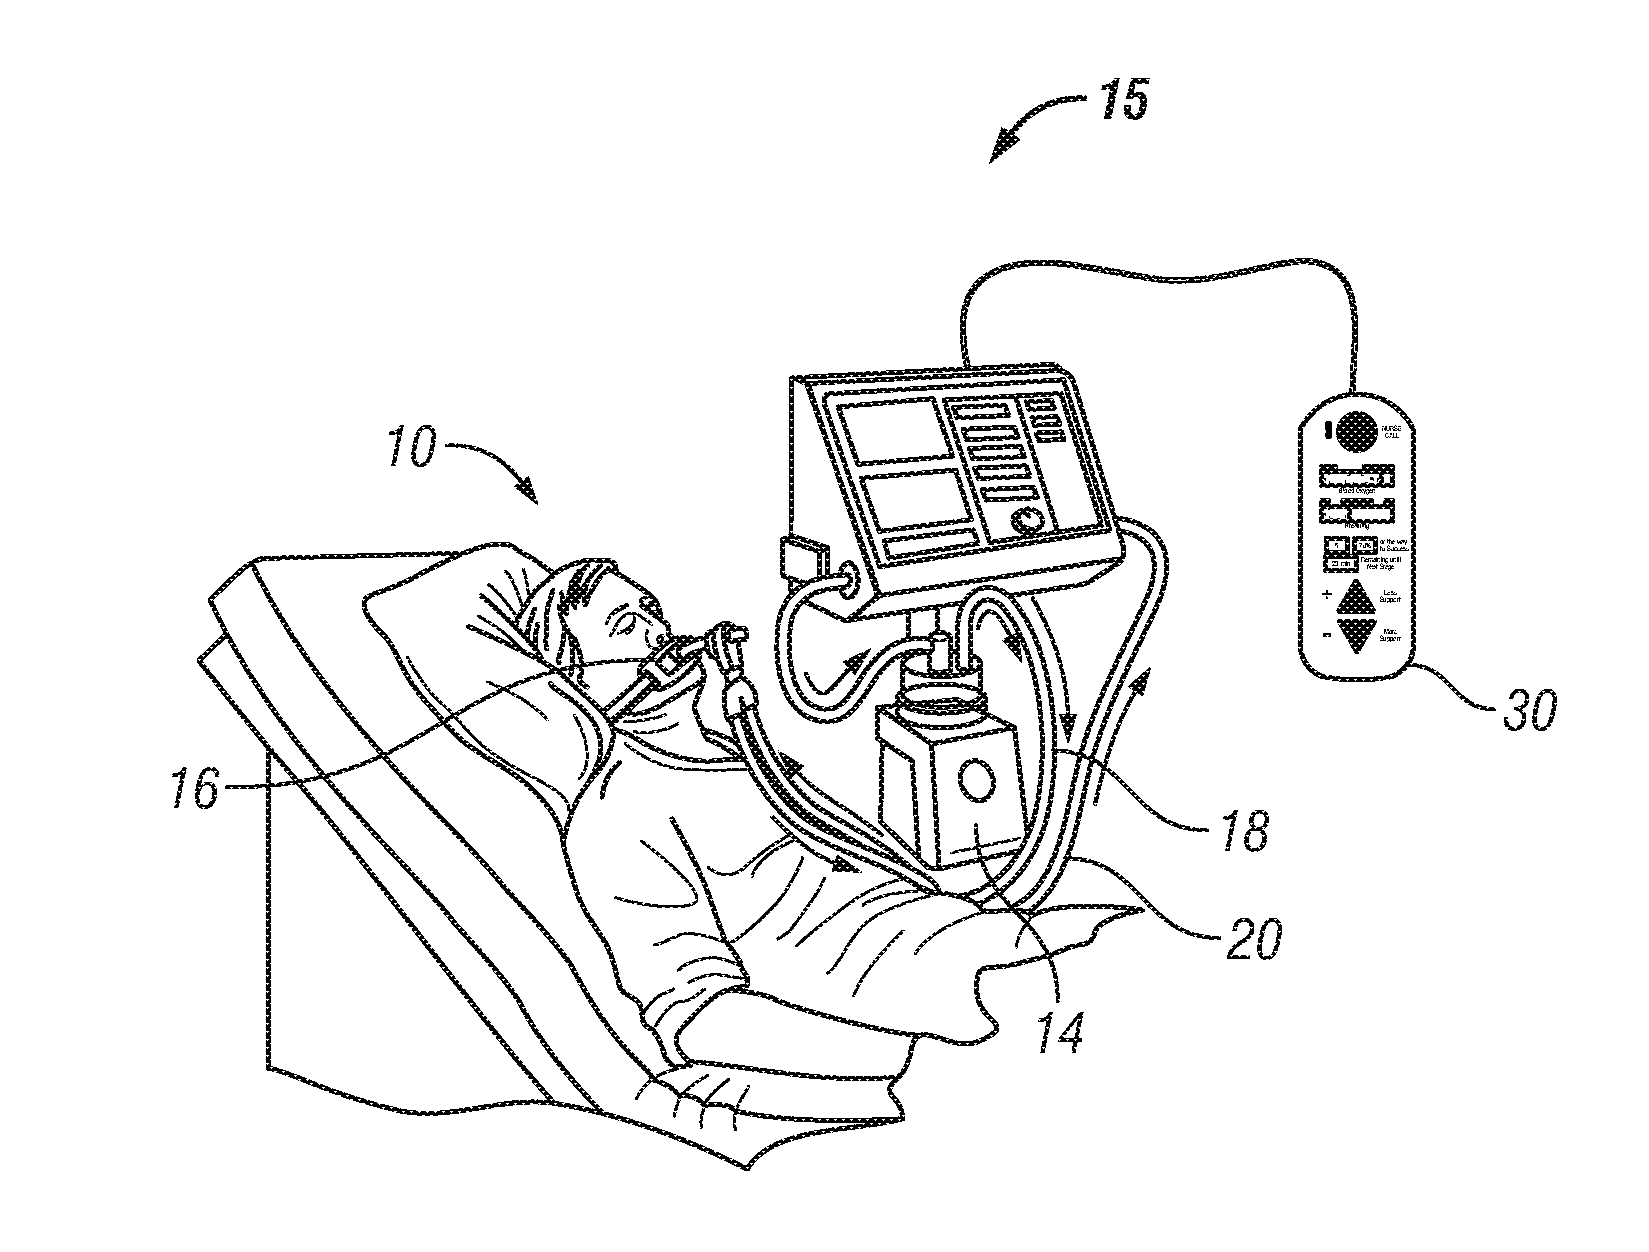 Patient-controlled aerosol administration